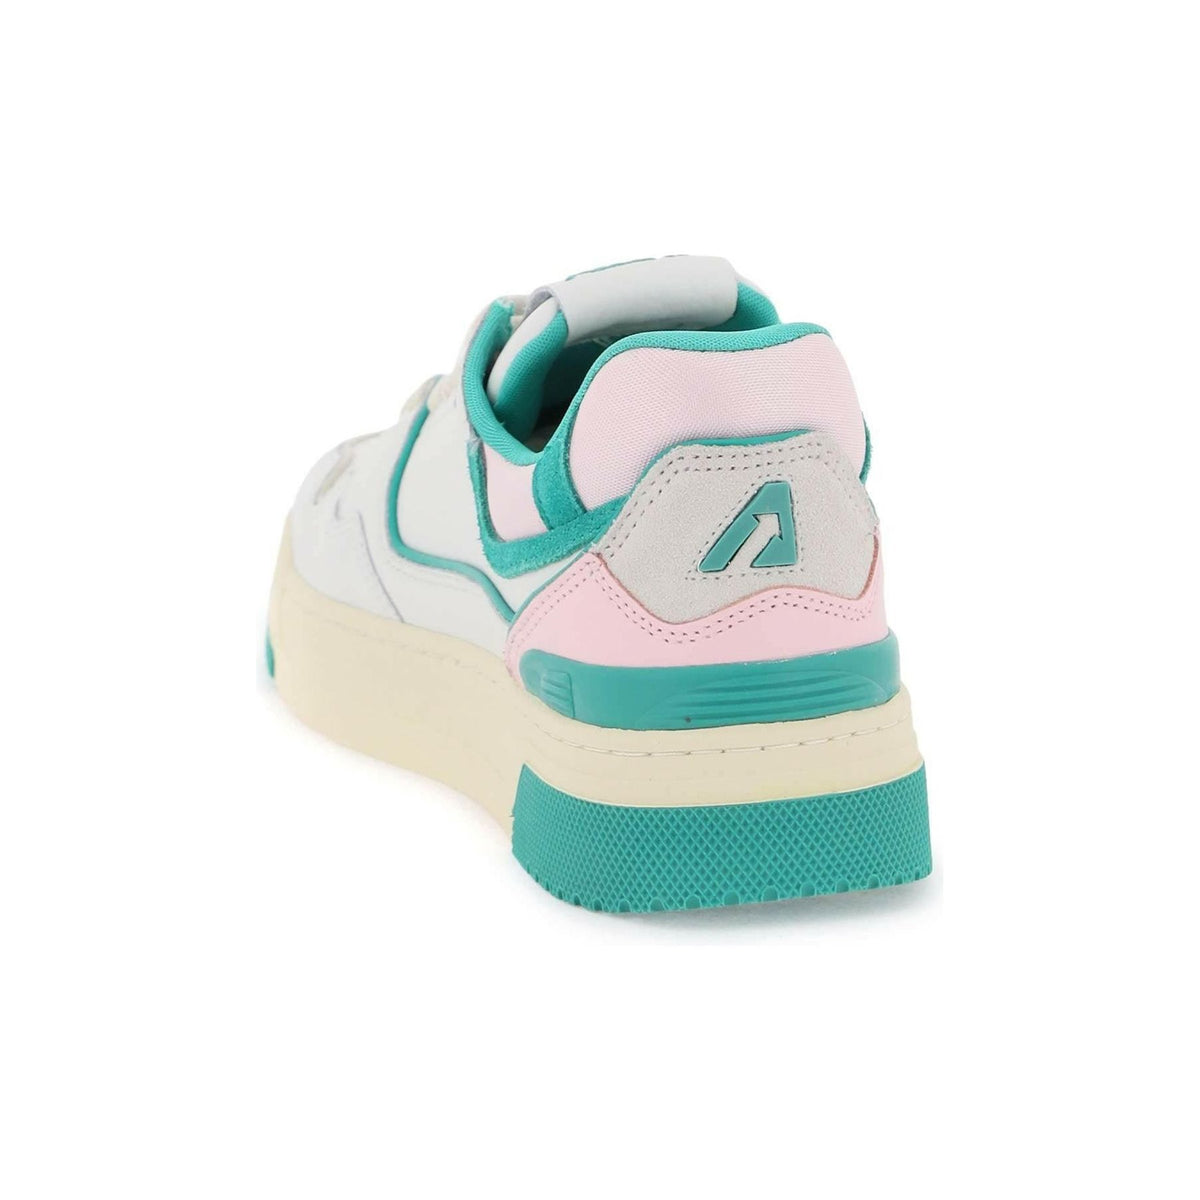 AUTRY - White and Emerald Green Leather CLC Sneakers - JOHN JULIA